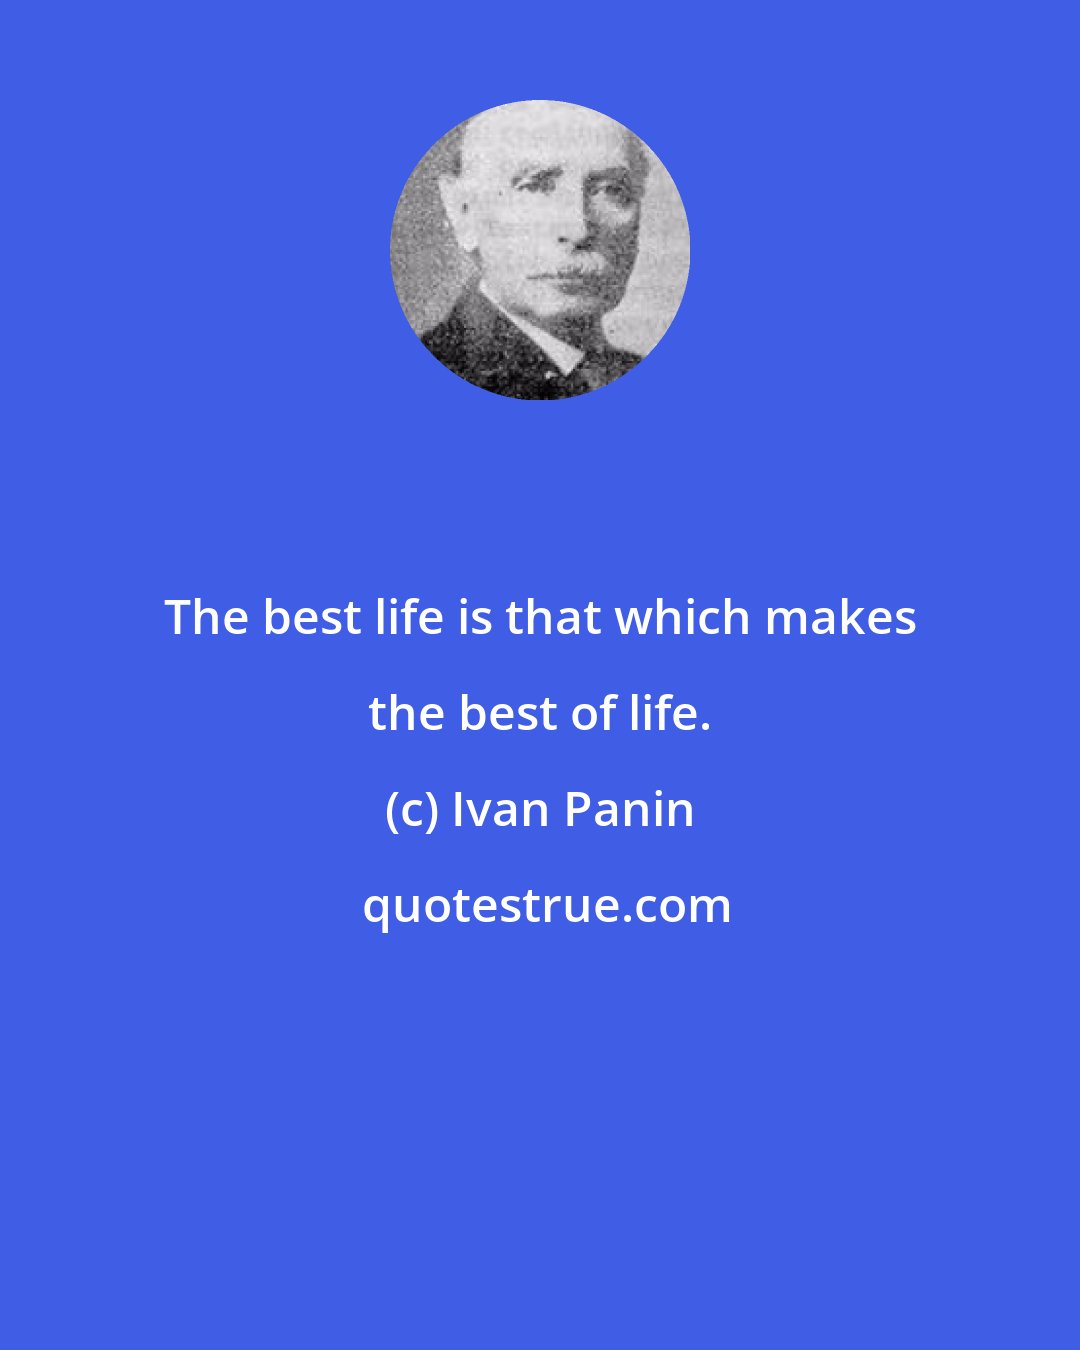 Ivan Panin: The best life is that which makes the best of life.